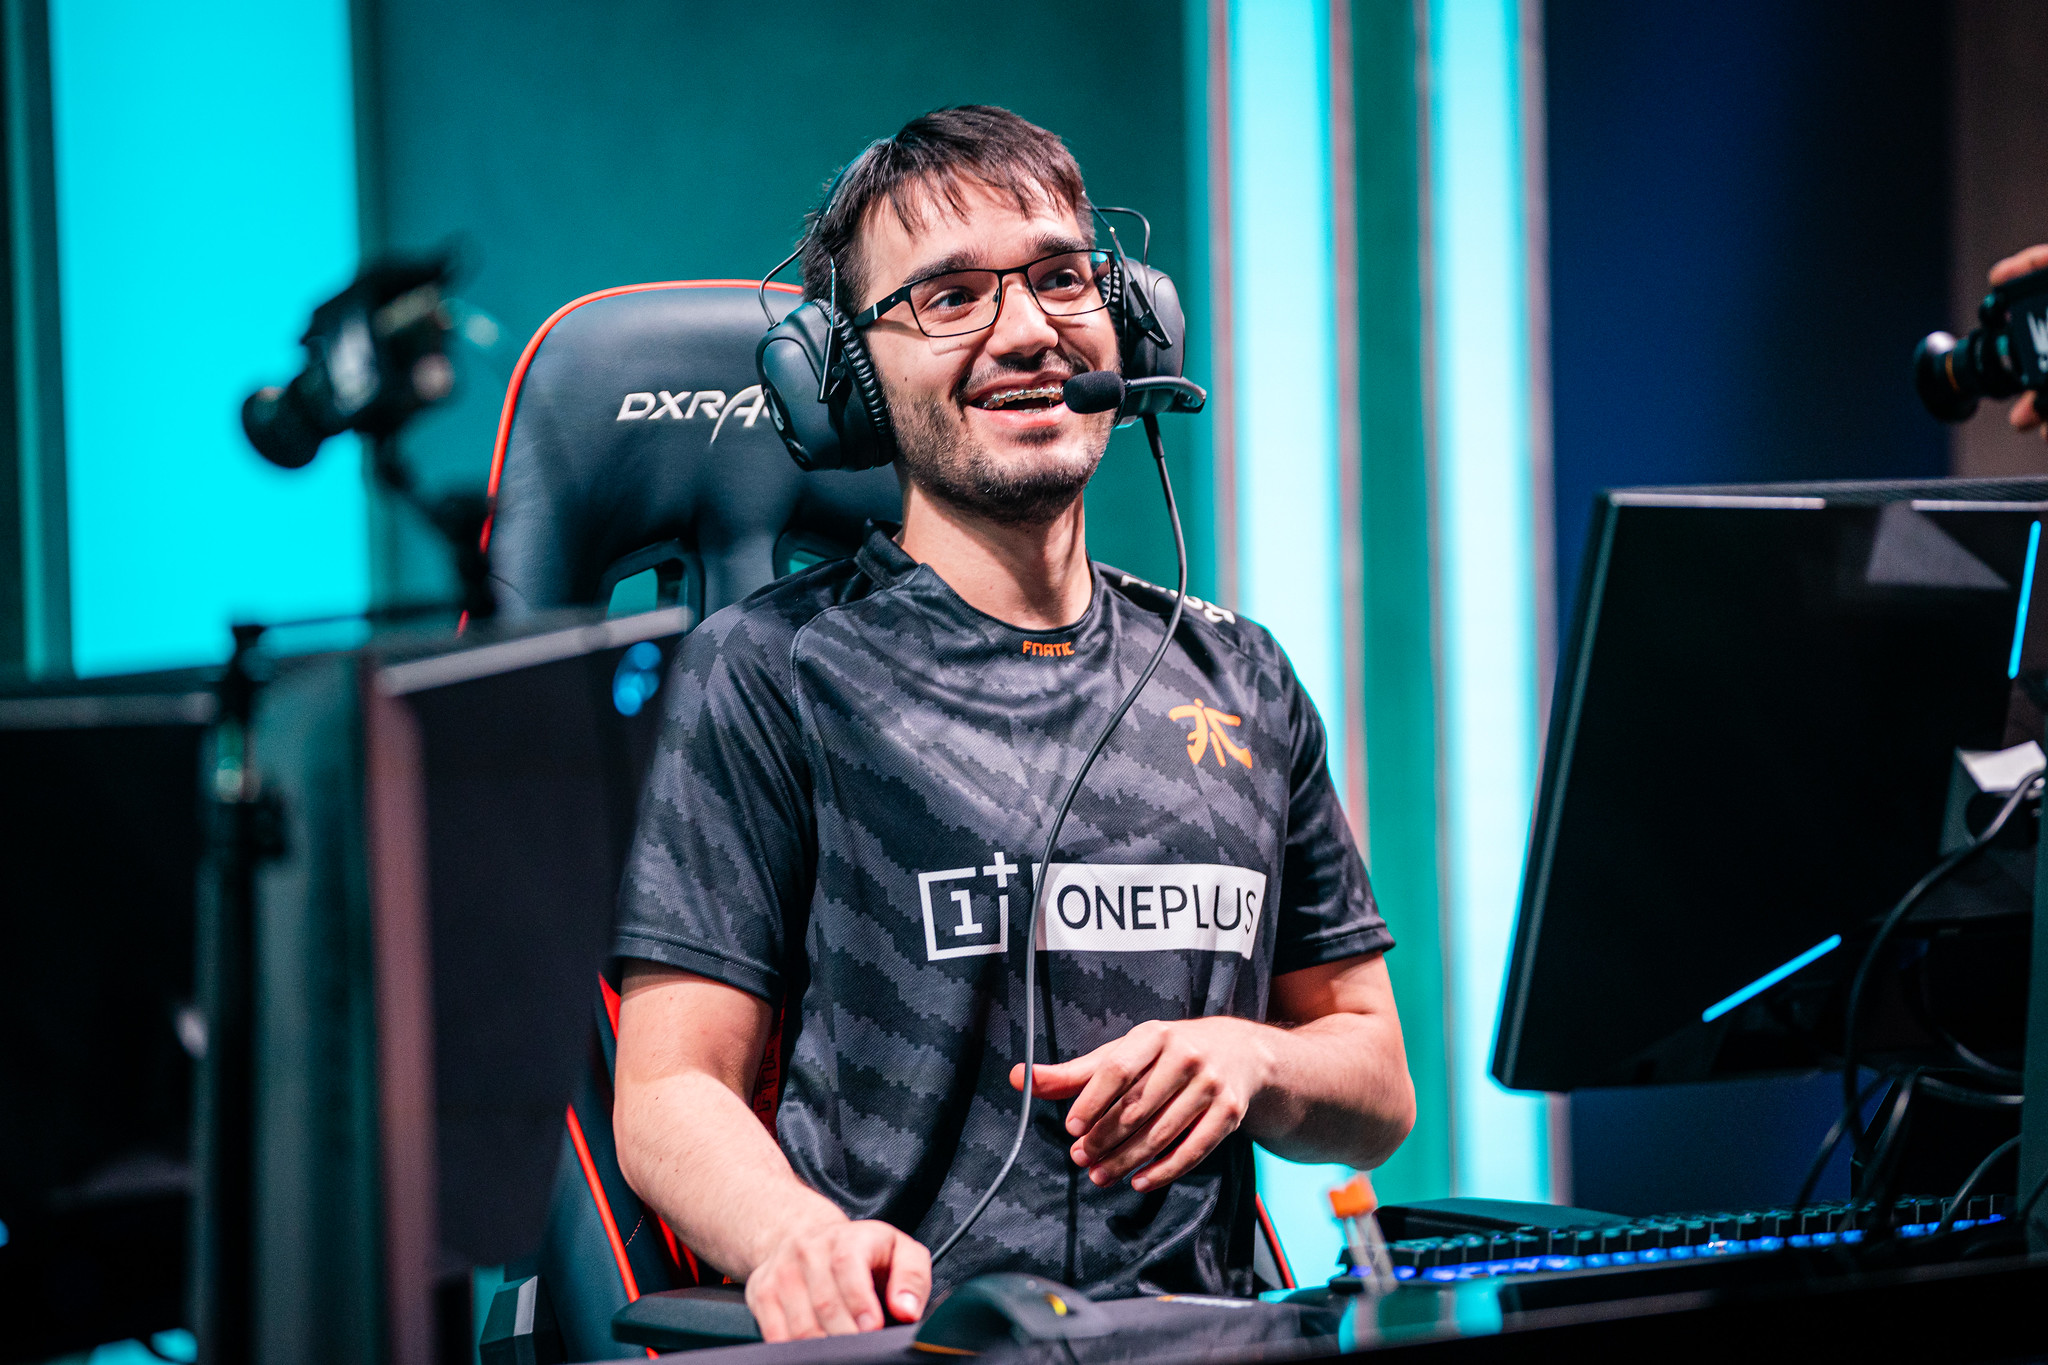 Hylissang collects his 2,500th assist against Excel Esports to become the  all-time LEC assist leader | Dot Esports